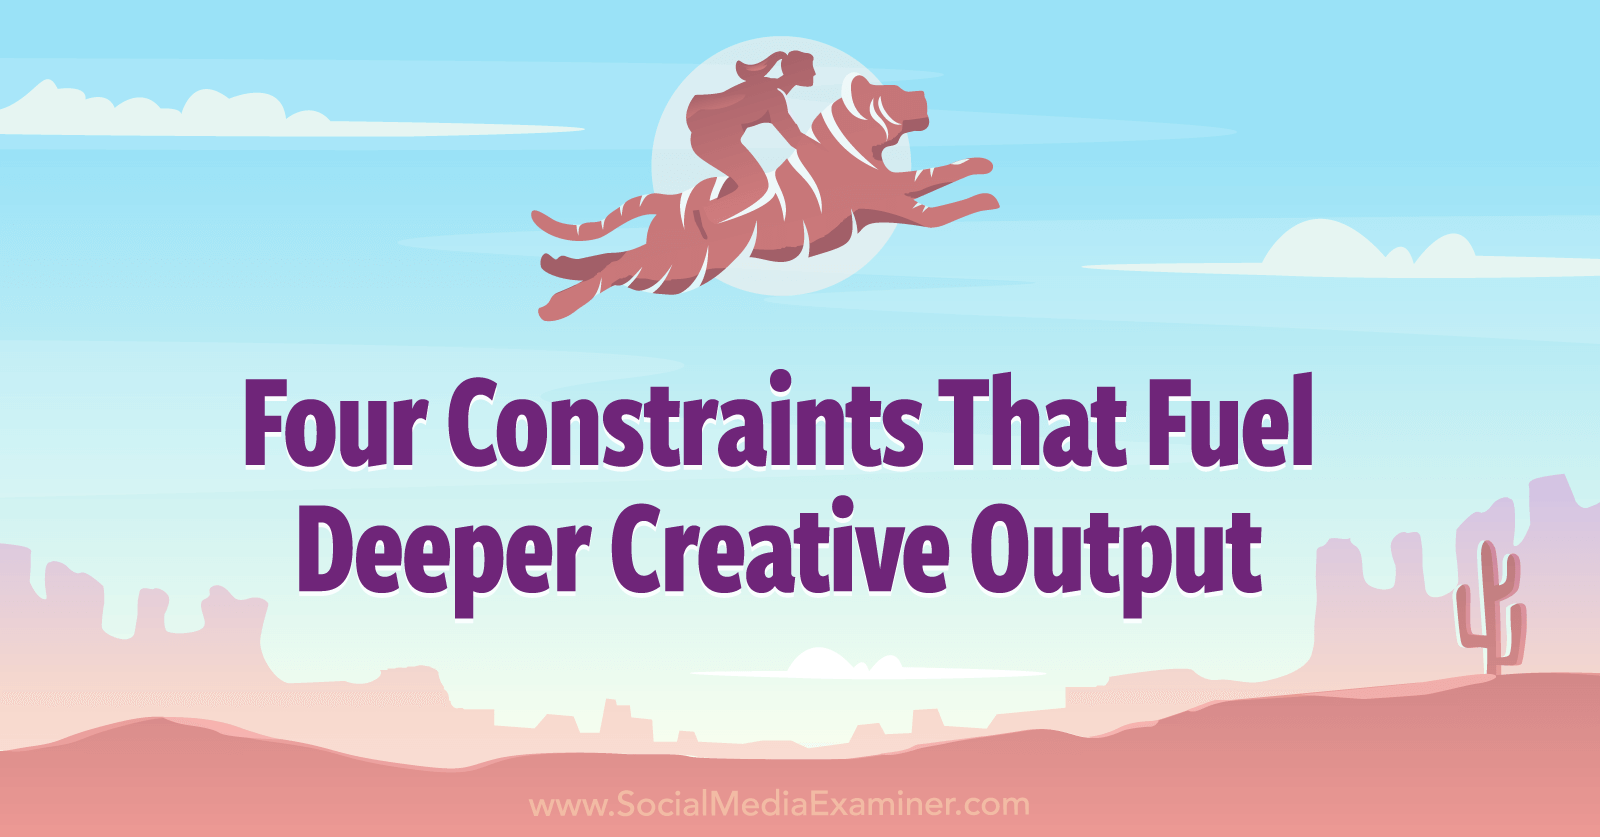 Four Constraints That Fuel Deeper Creative Output by Social Media Examiner